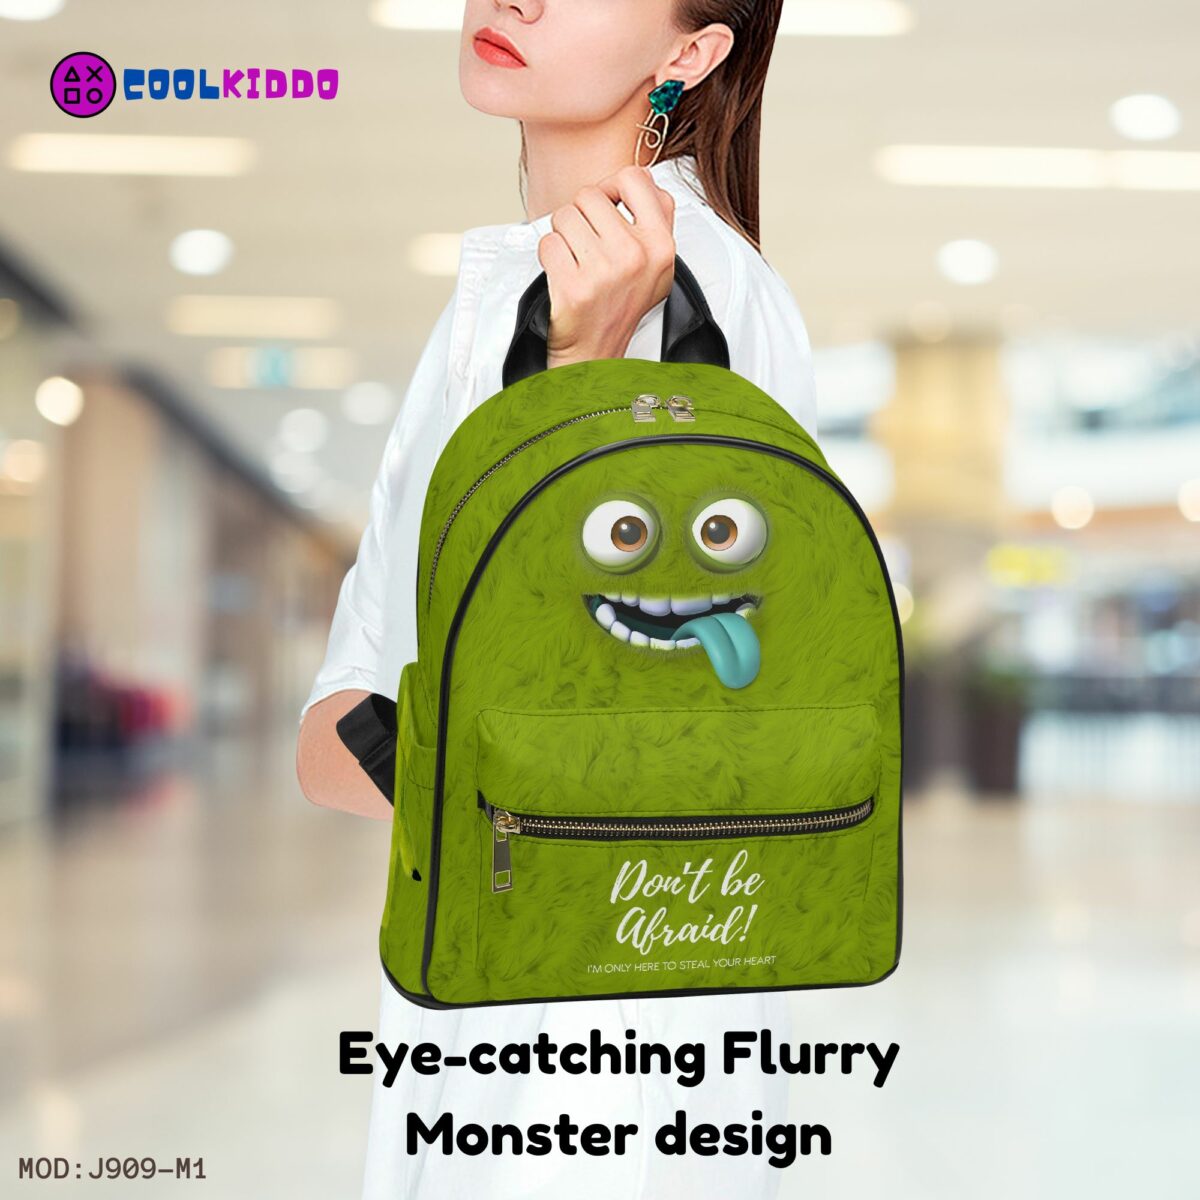 Green Monster Face Little Backpack – Flurry Simulation Fun All-Over Print Leather Street Bag For Girls Cool Kiddo 18